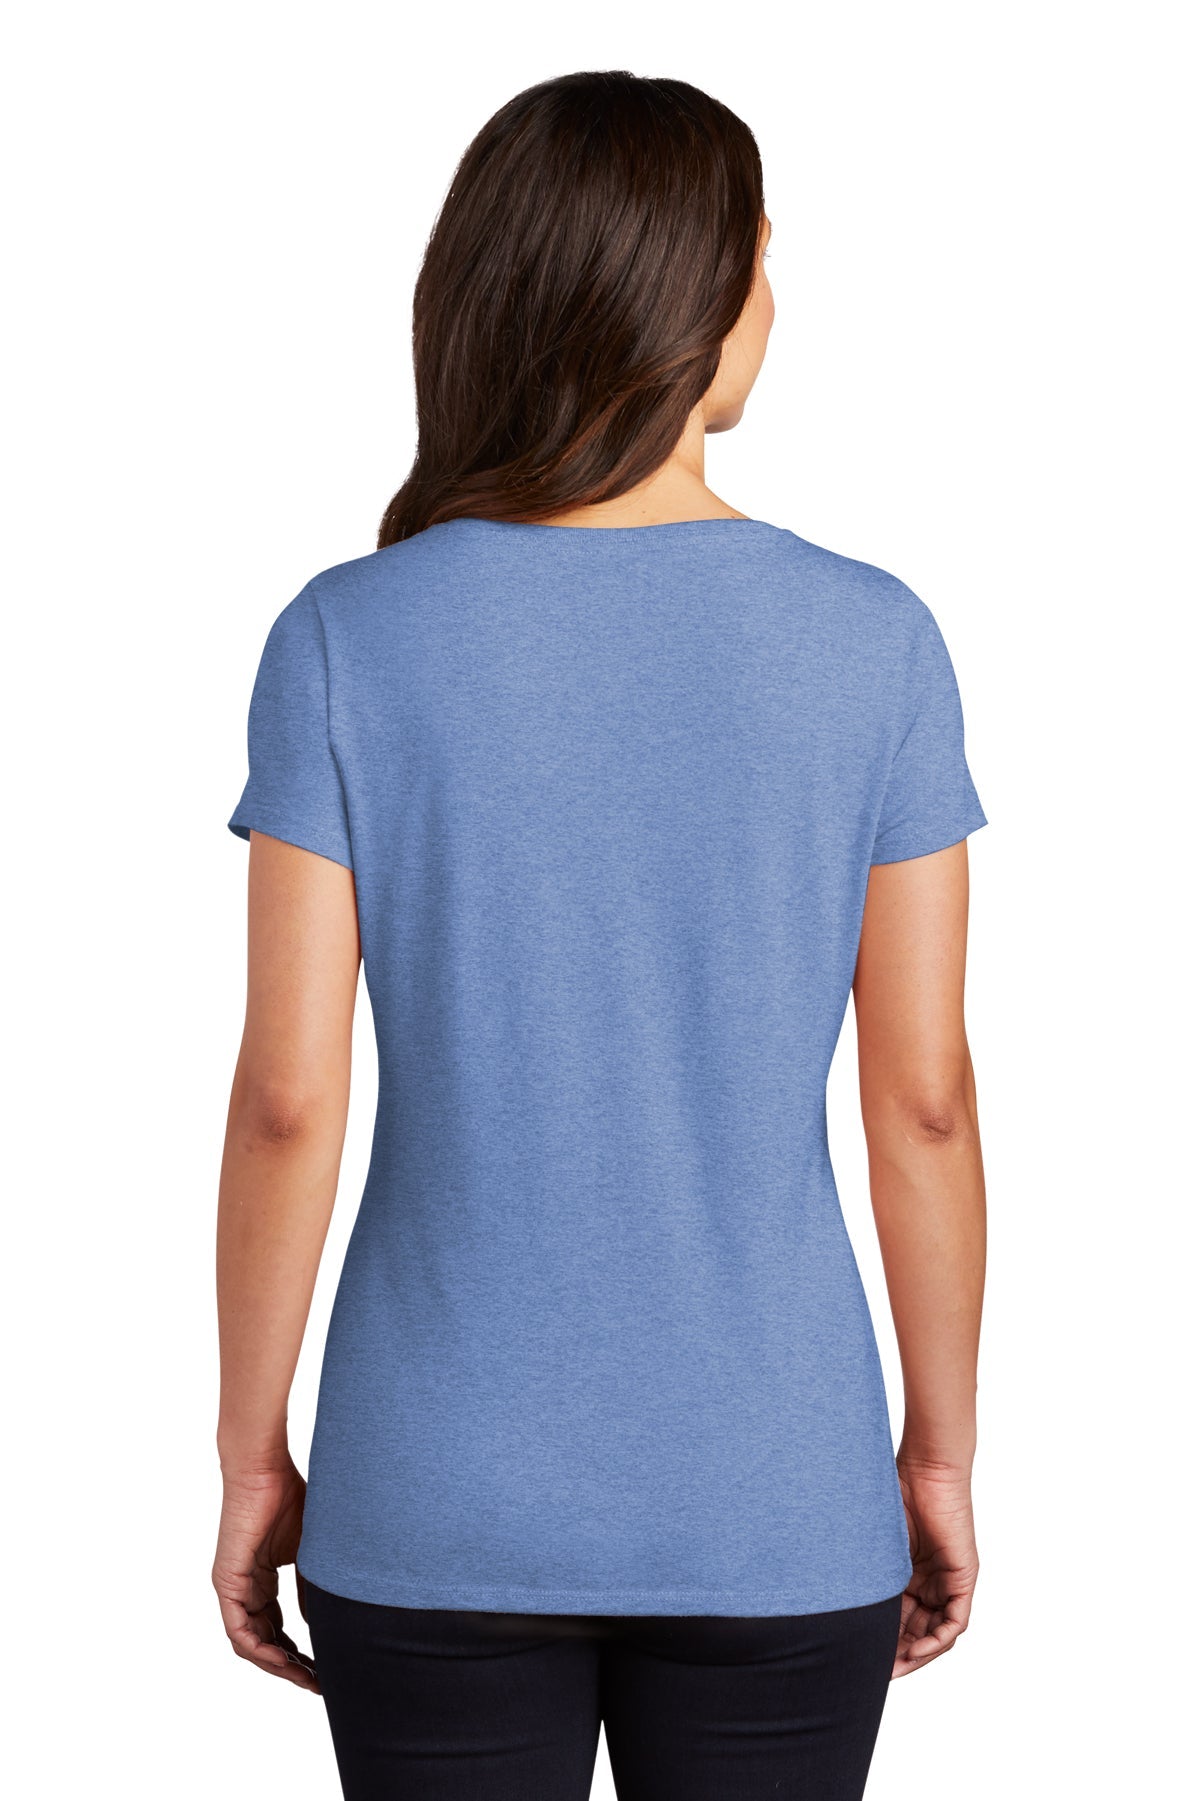 District Made Ladies Perfect Tri V-Neck Tee